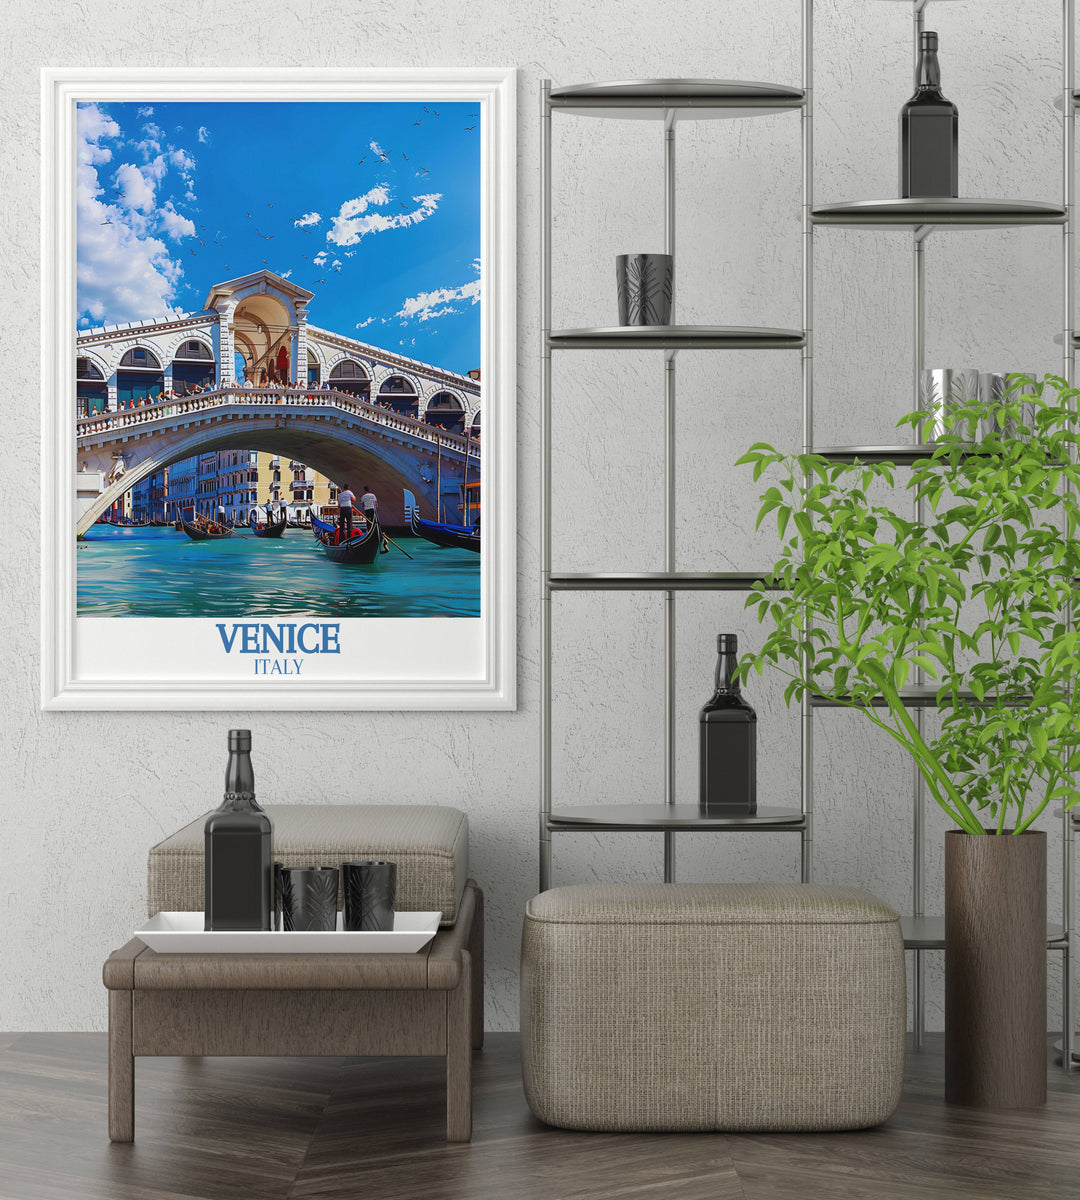 Art print of the Bridge of Sighs in Venice celebrating the historic and cultural heritage of this iconic Italian city